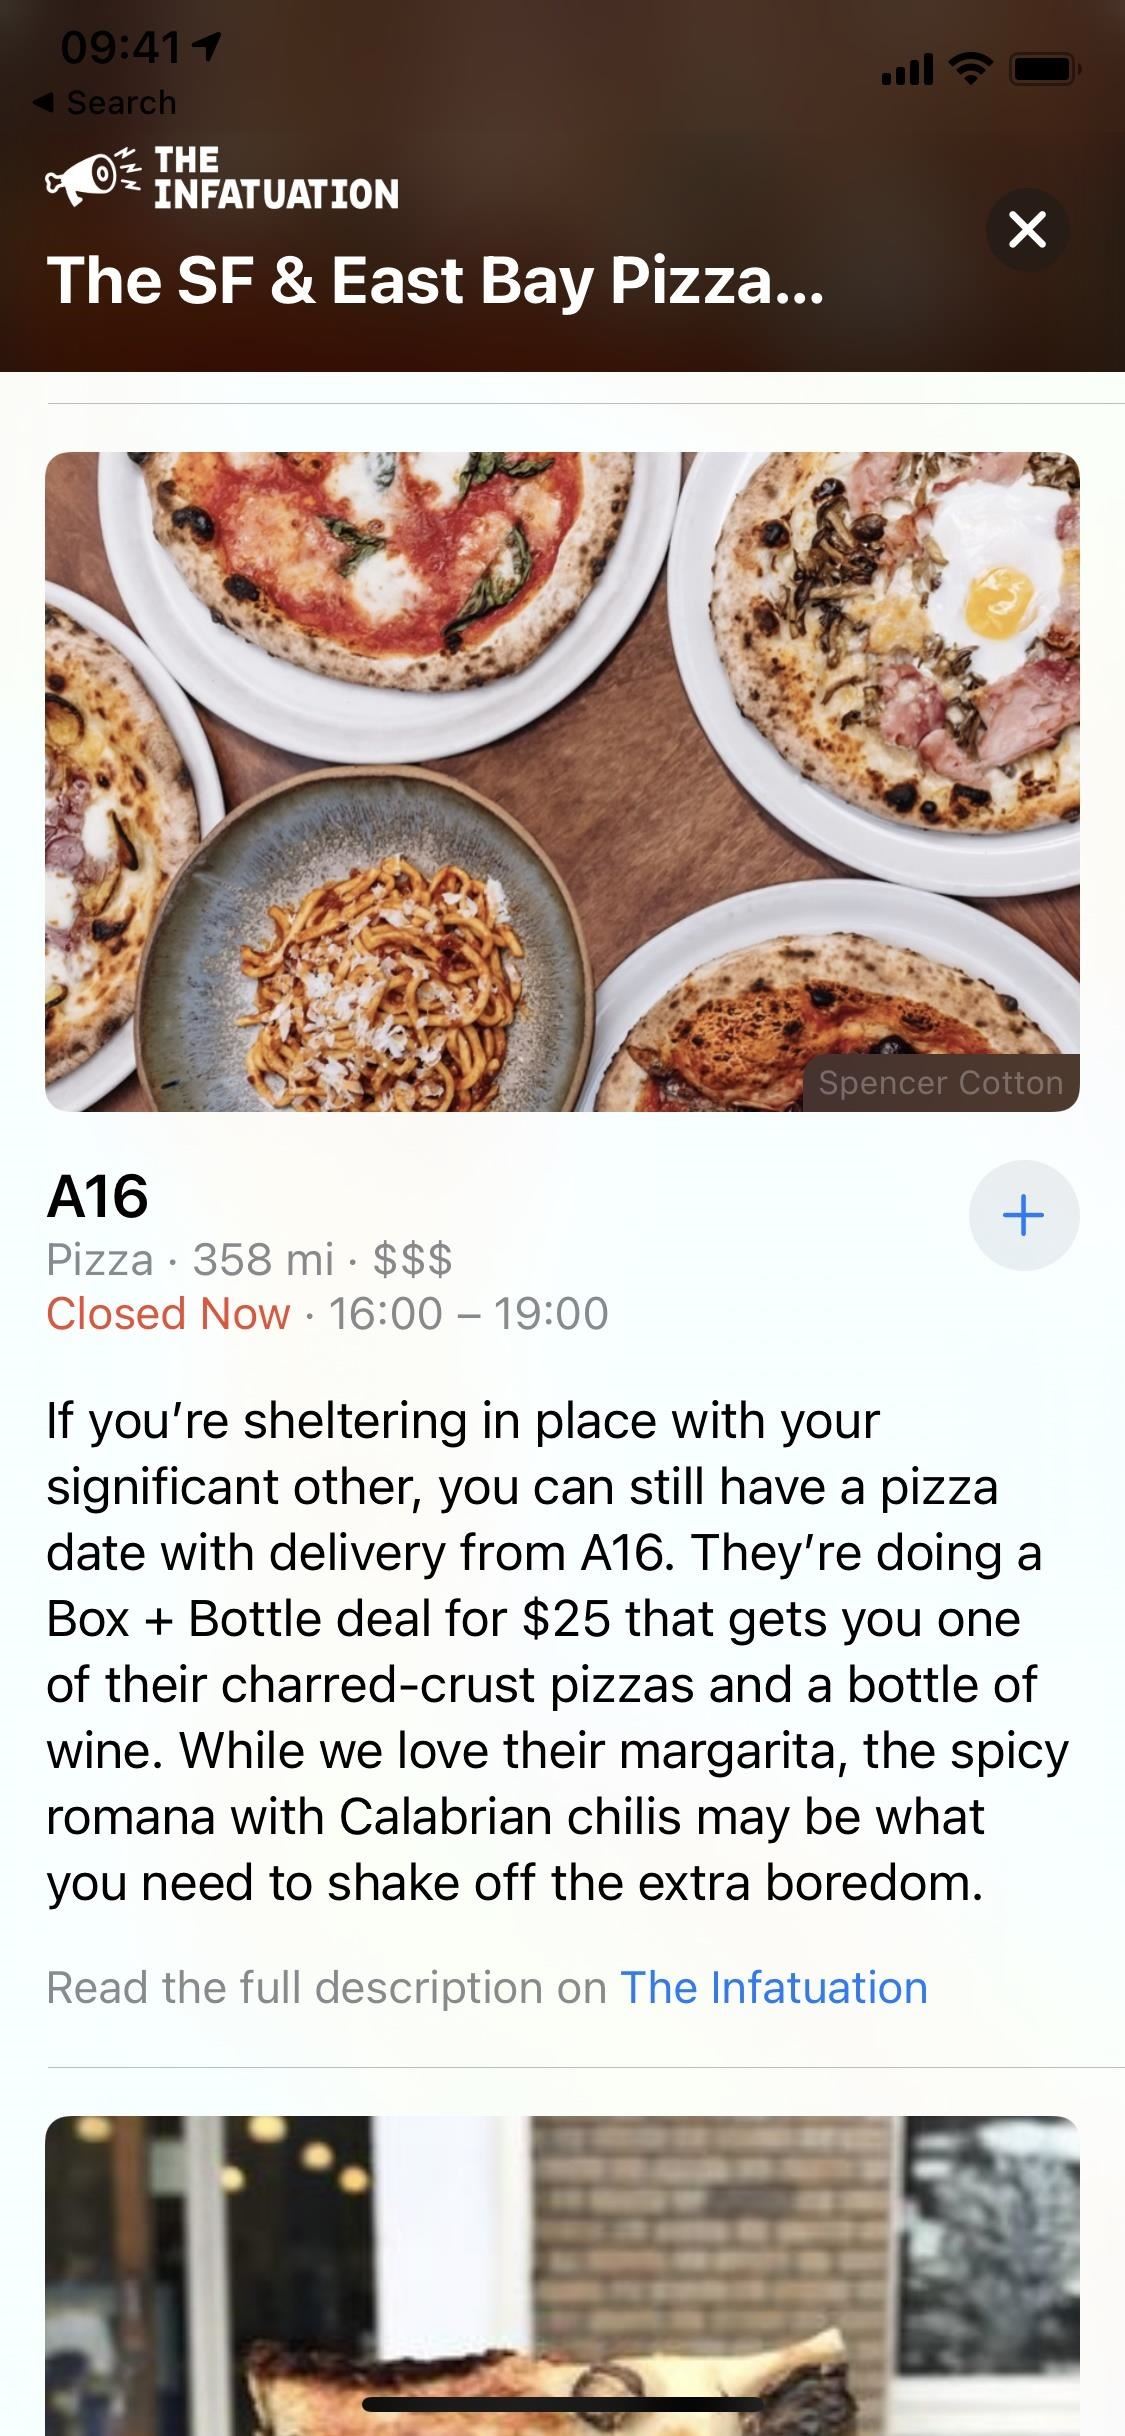 See Nearby Recommendations from Brands via Curated City Guides in iOS 14's Apple Maps